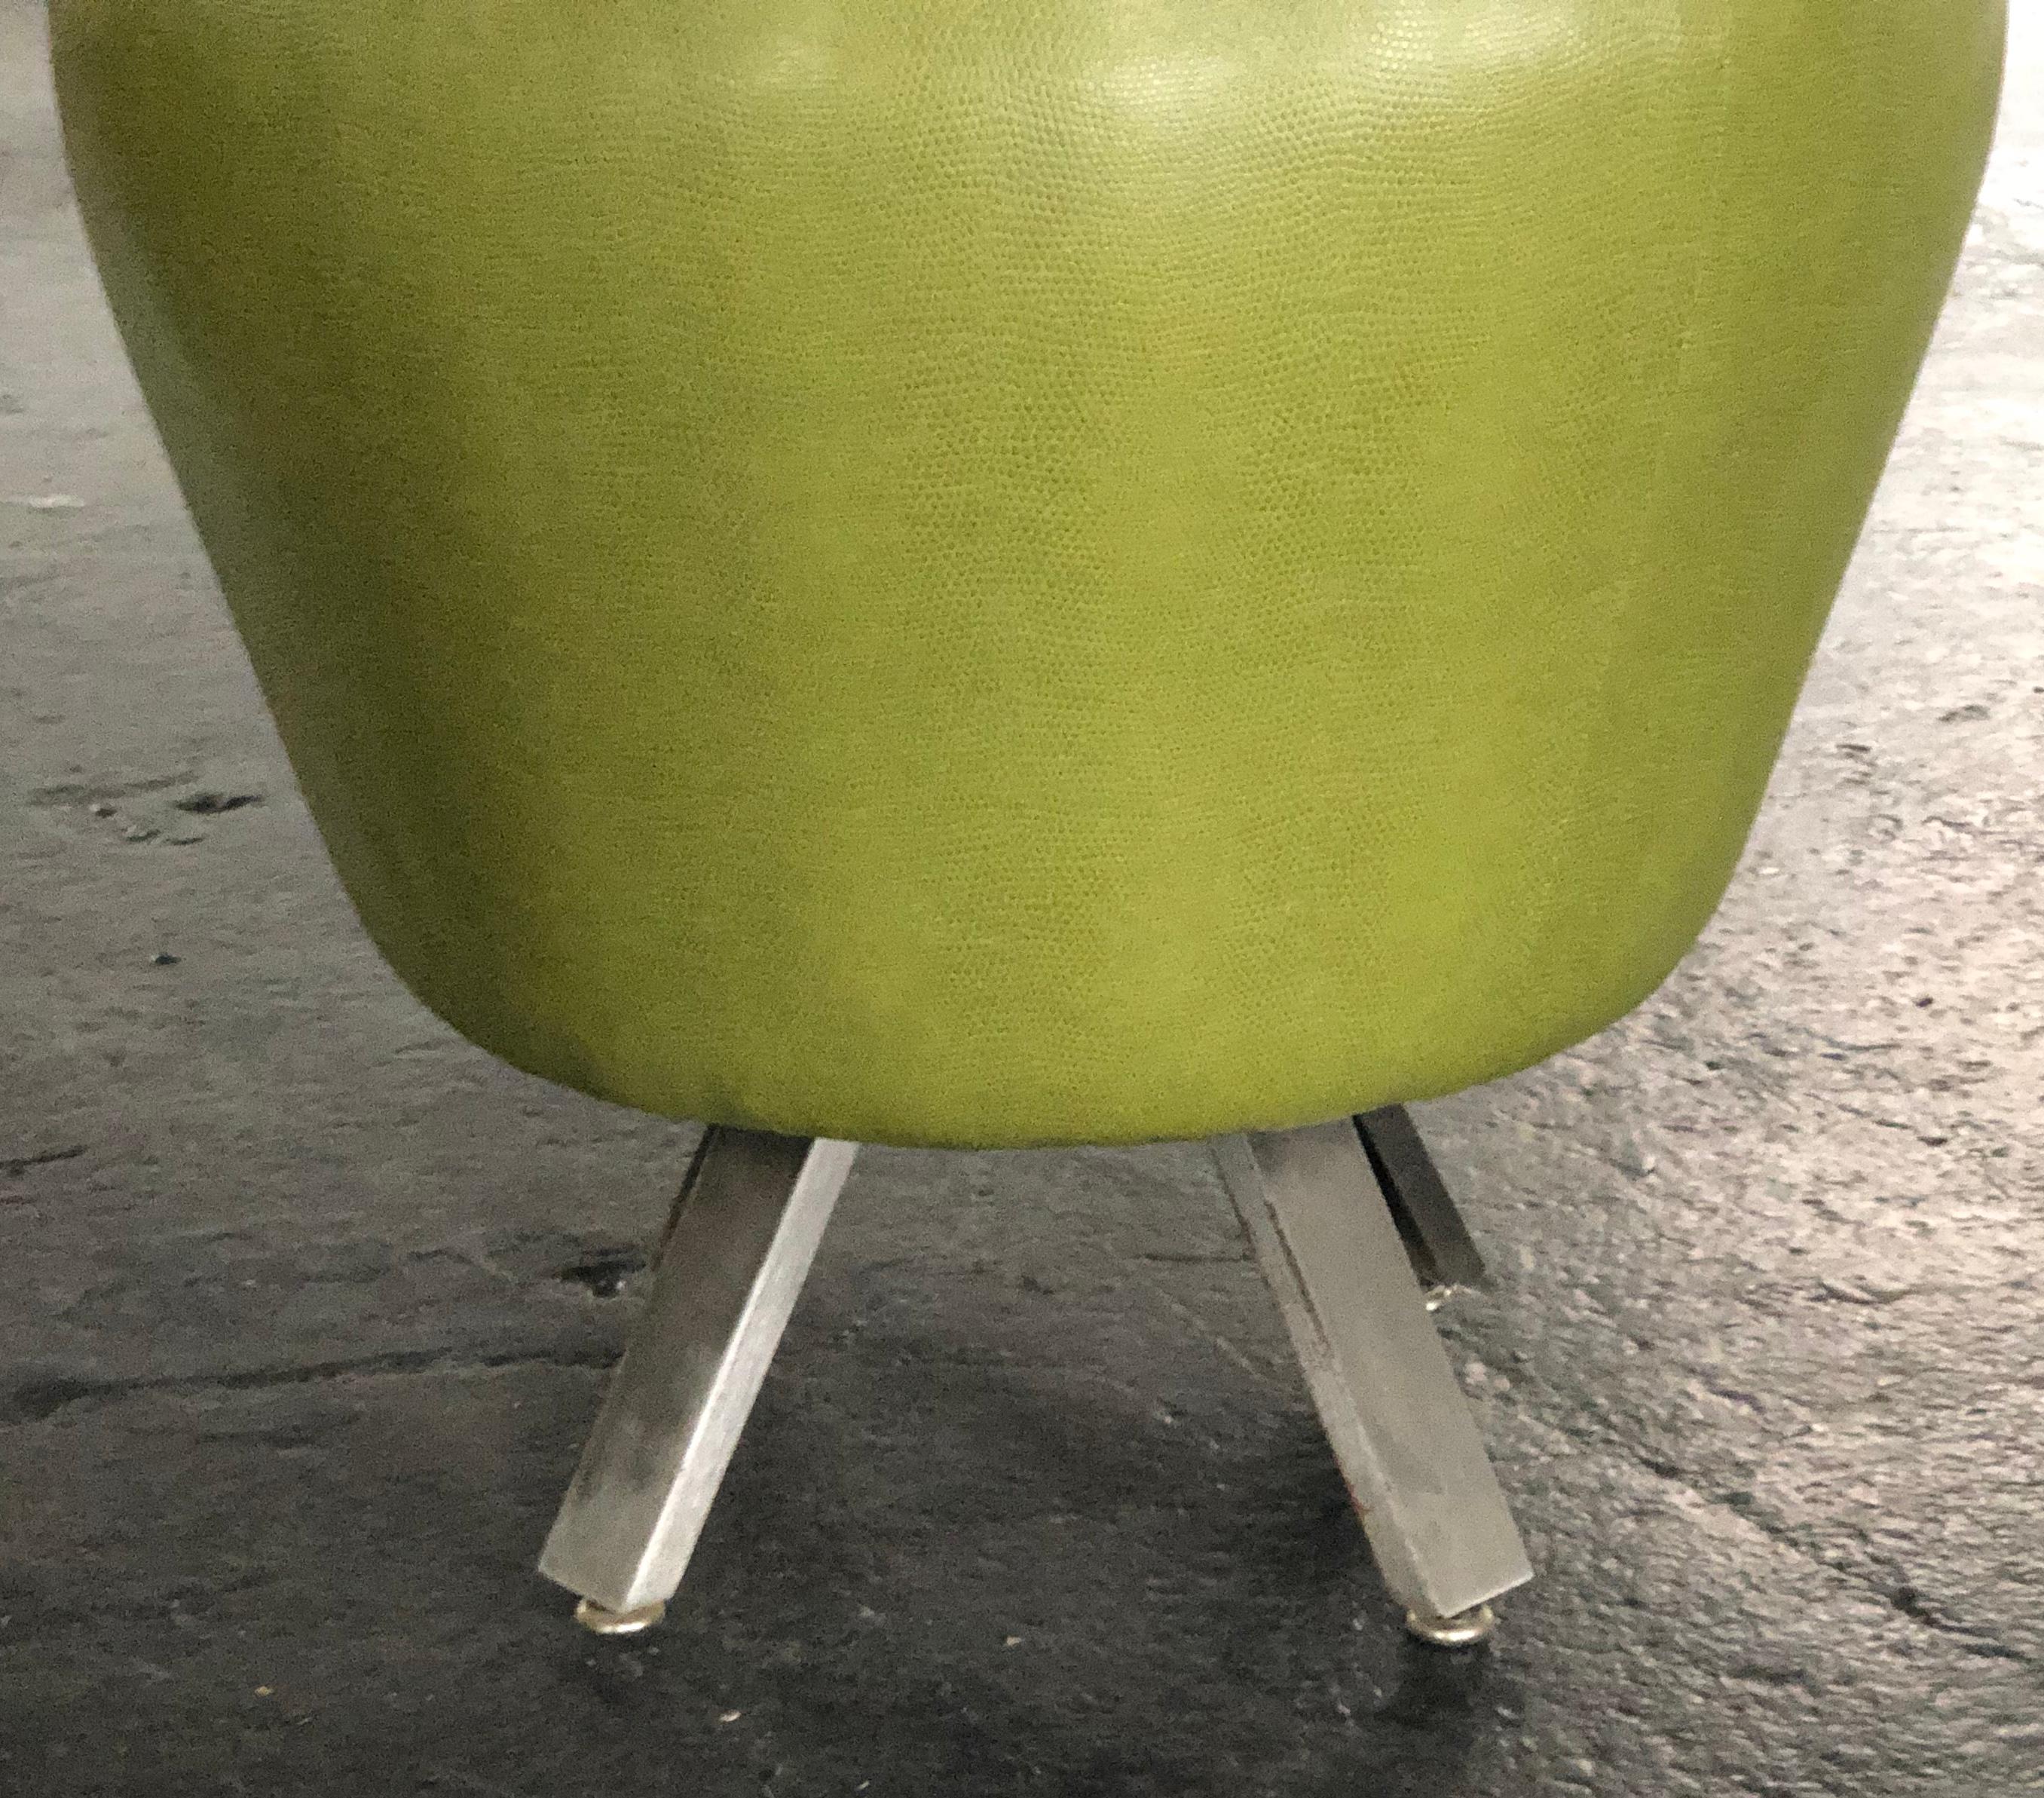 This unique pair of custom stools are upholstered in a Pea Green 